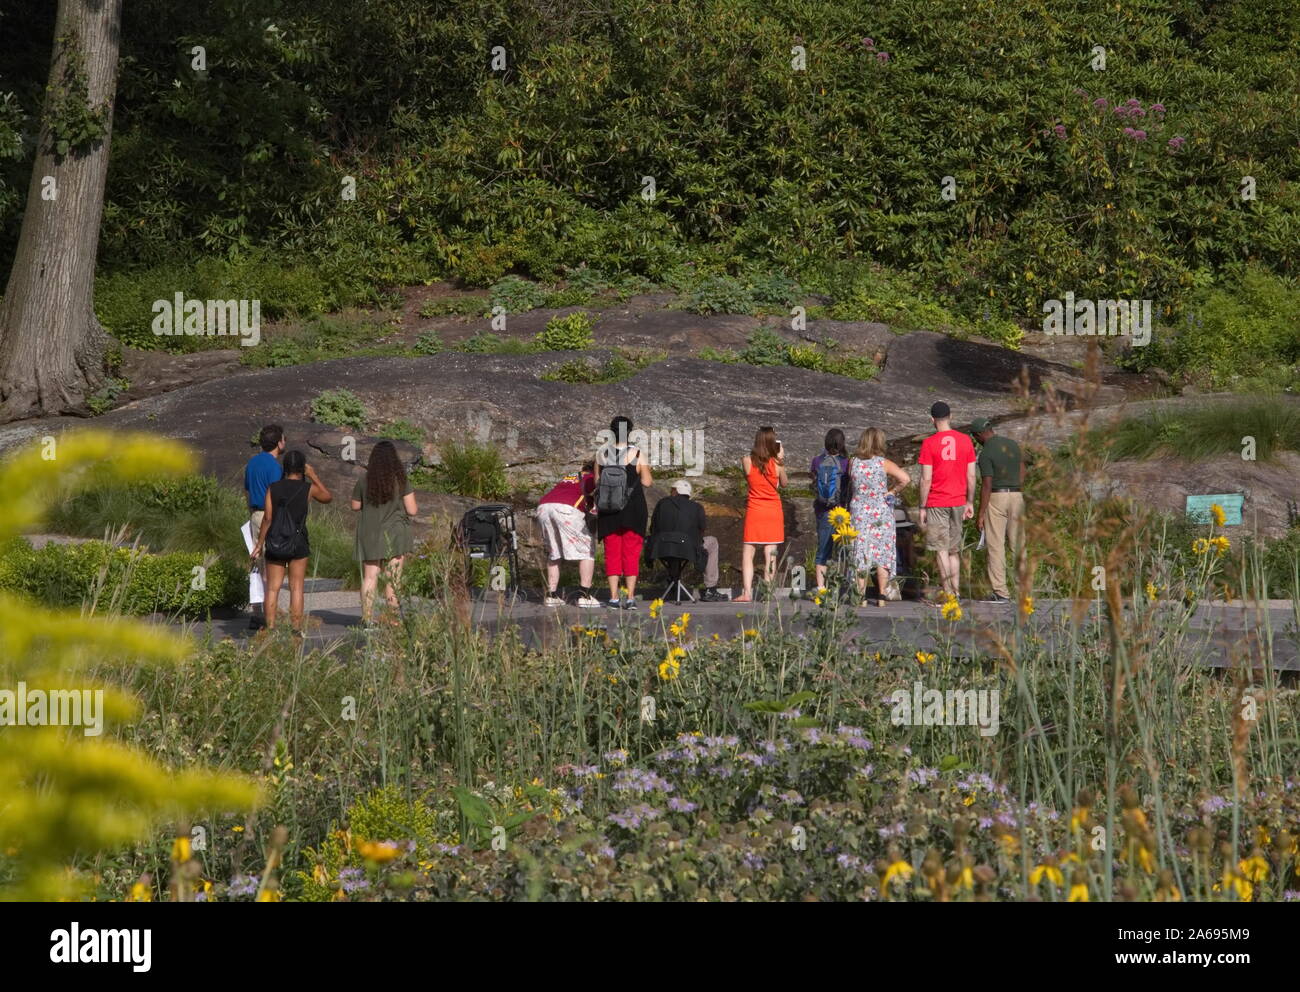 The Bronx, New York / USA - August 13, 2017: Crowd of tourists look at a pond on the other side of a field of wildflowers Stock Photo